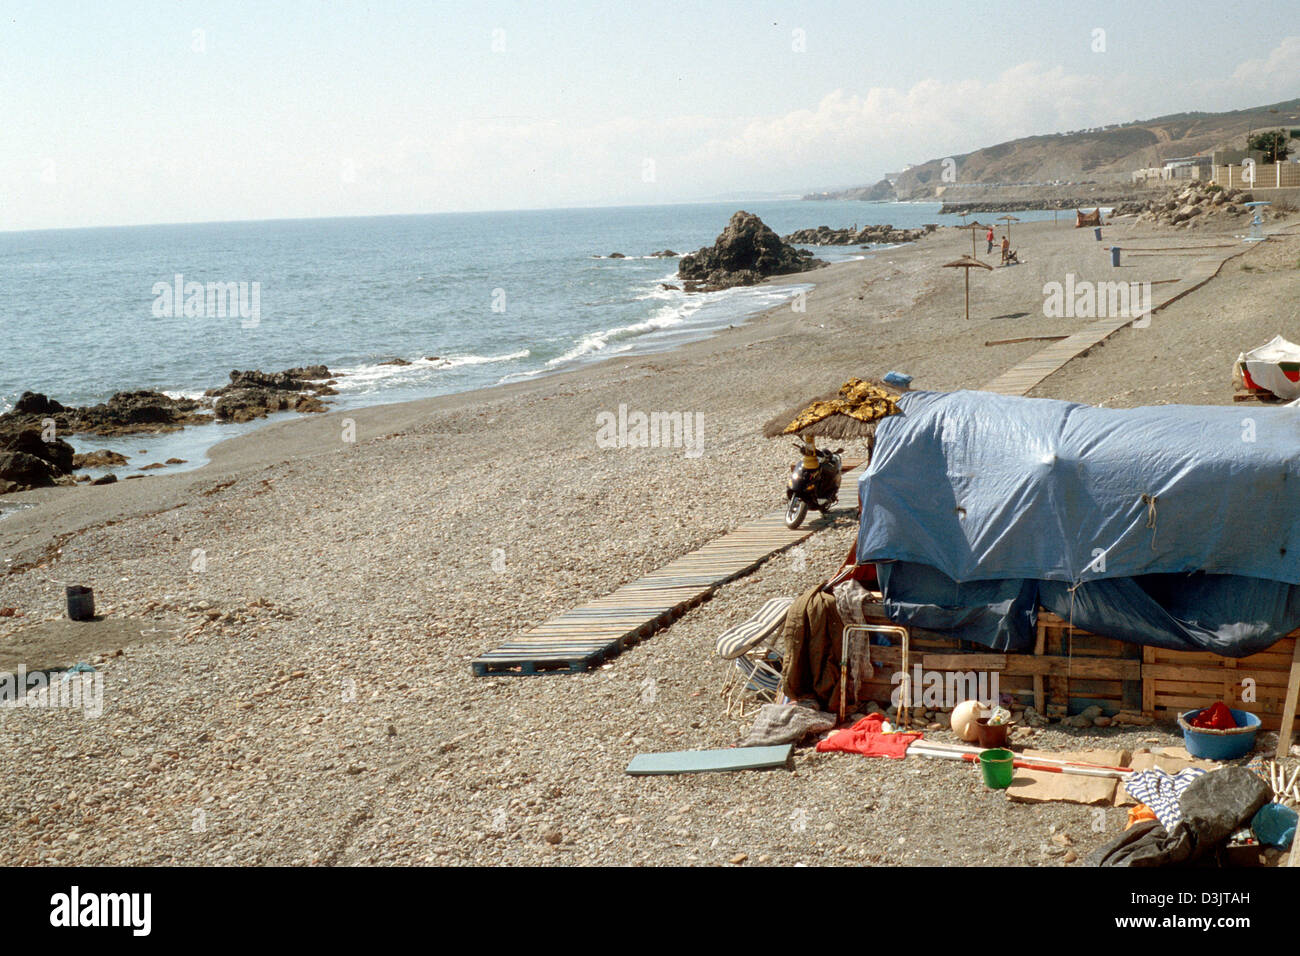 (dpa) - A view of a tent set up on the beach by refugees along the coast in the Spanish exclave of Ceuta, 9 September 2004. The harbour town of Ceuta at the north western tip of Morocco belongs to Spain since 1580. Stock Photo